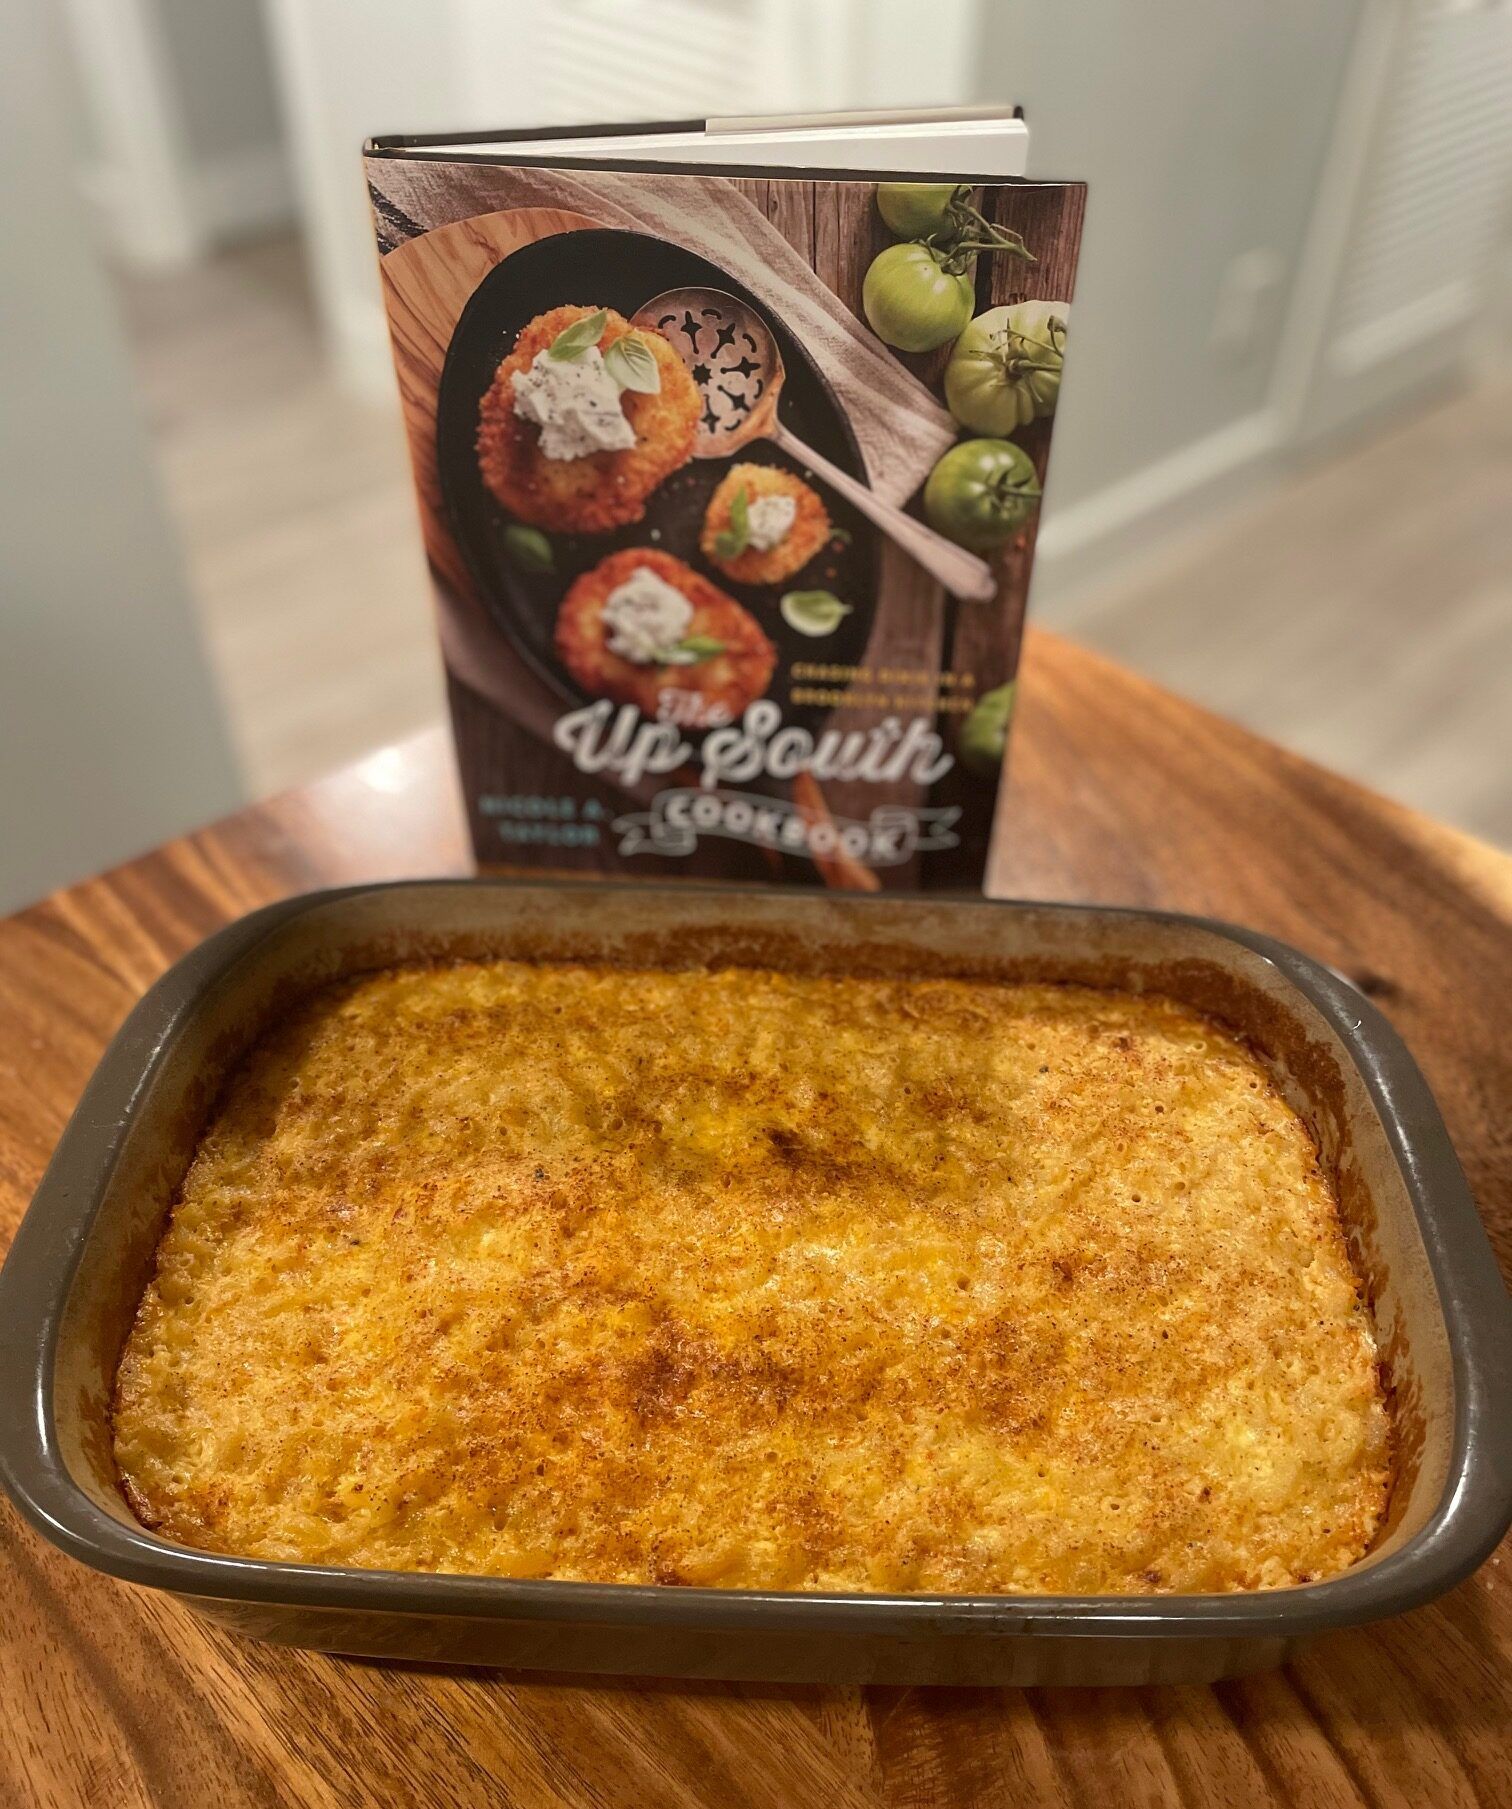 A casserole dish of baked mac and cheese in front of The Up South Cookbook